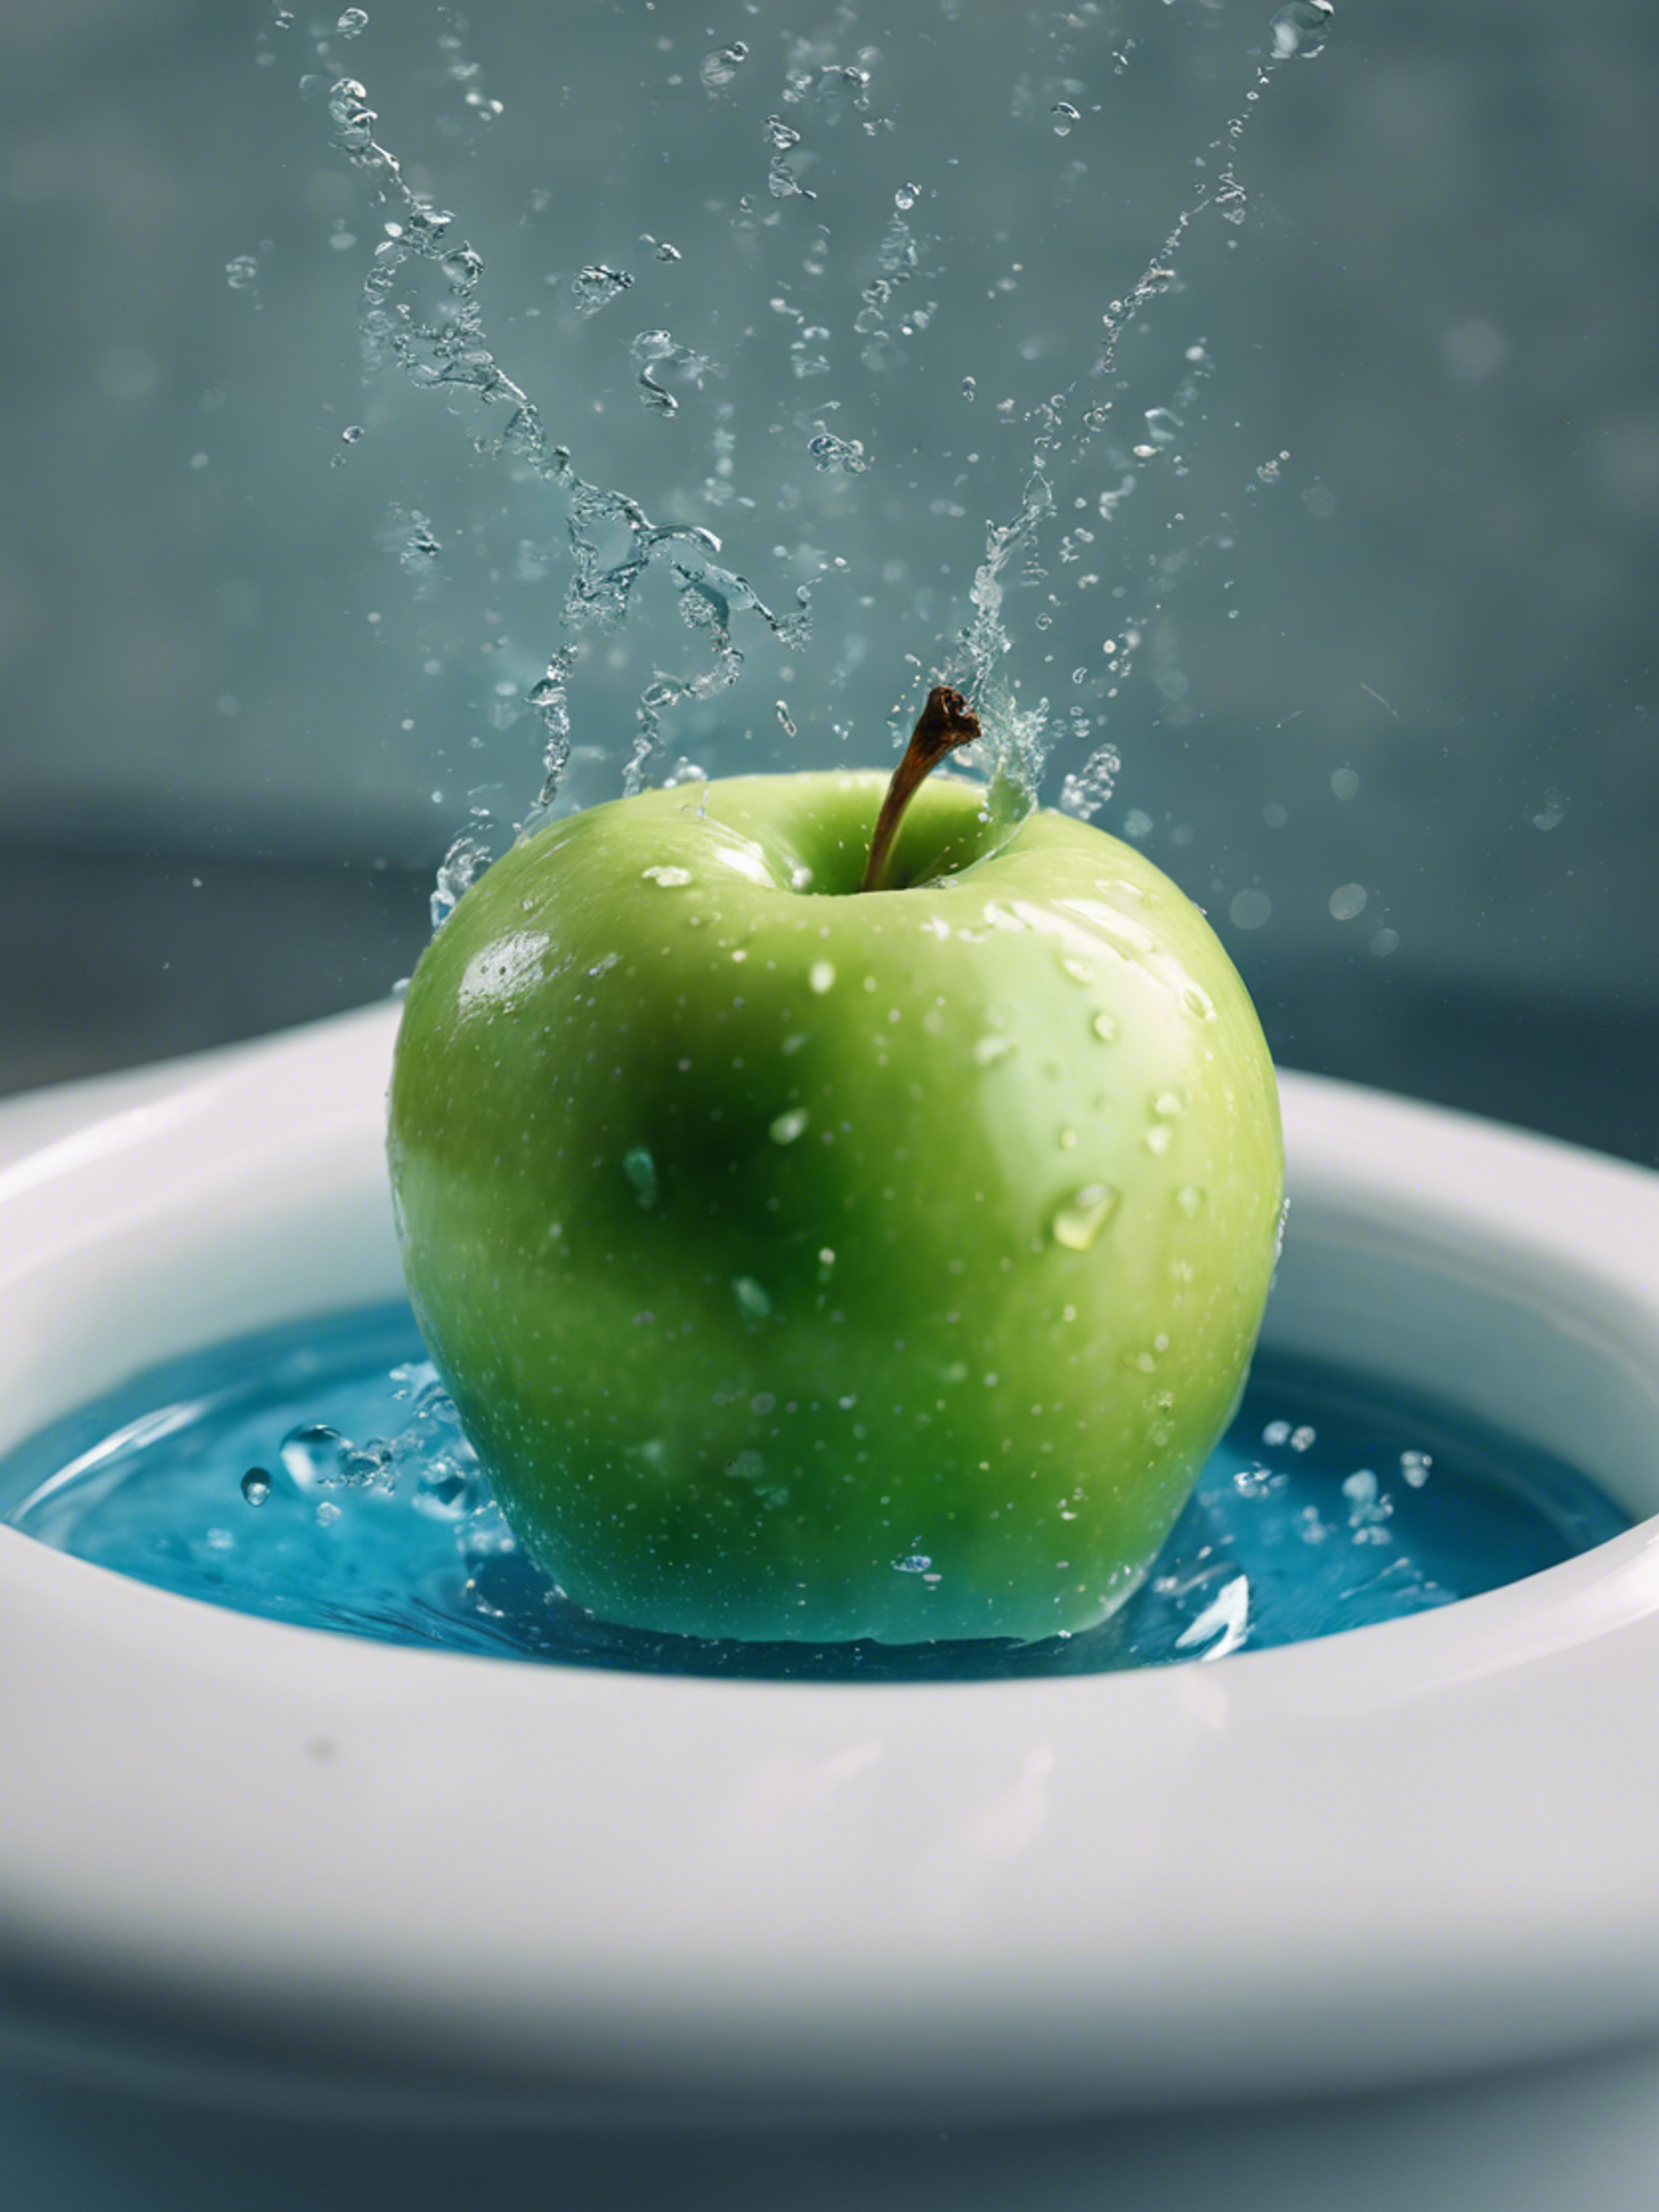 A green apple falling into a basin filled with azure blue water. ផ្ទាំង​រូបភាព[a9bb5407cd4a4f929343]